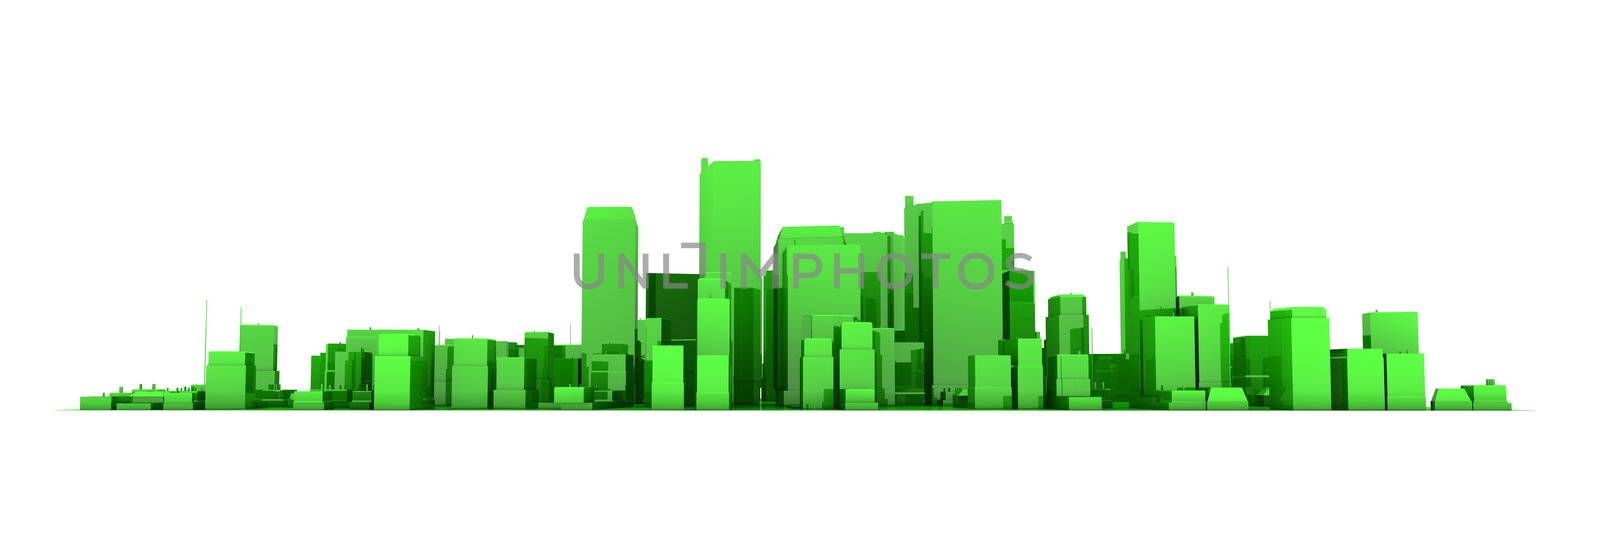 wide 3D cityscape model in shiny green  with a white background - buildings are casting no shadows